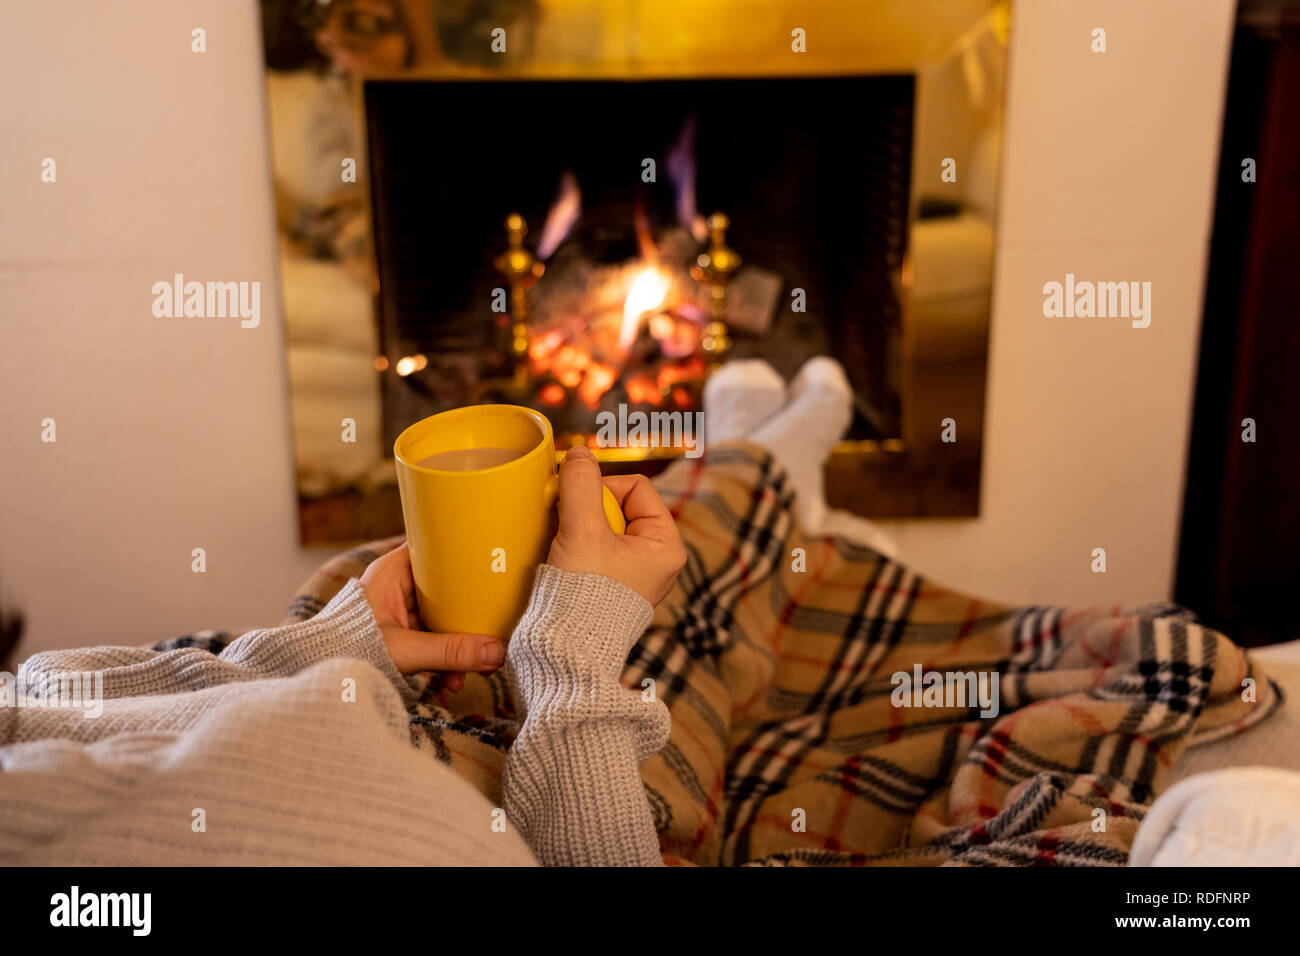 Close up image of woman sitting under the blanket by cozy fireplace warming up her feet in woolen socks relaxing with cup of hot chocolate drink at ho Stock Photo